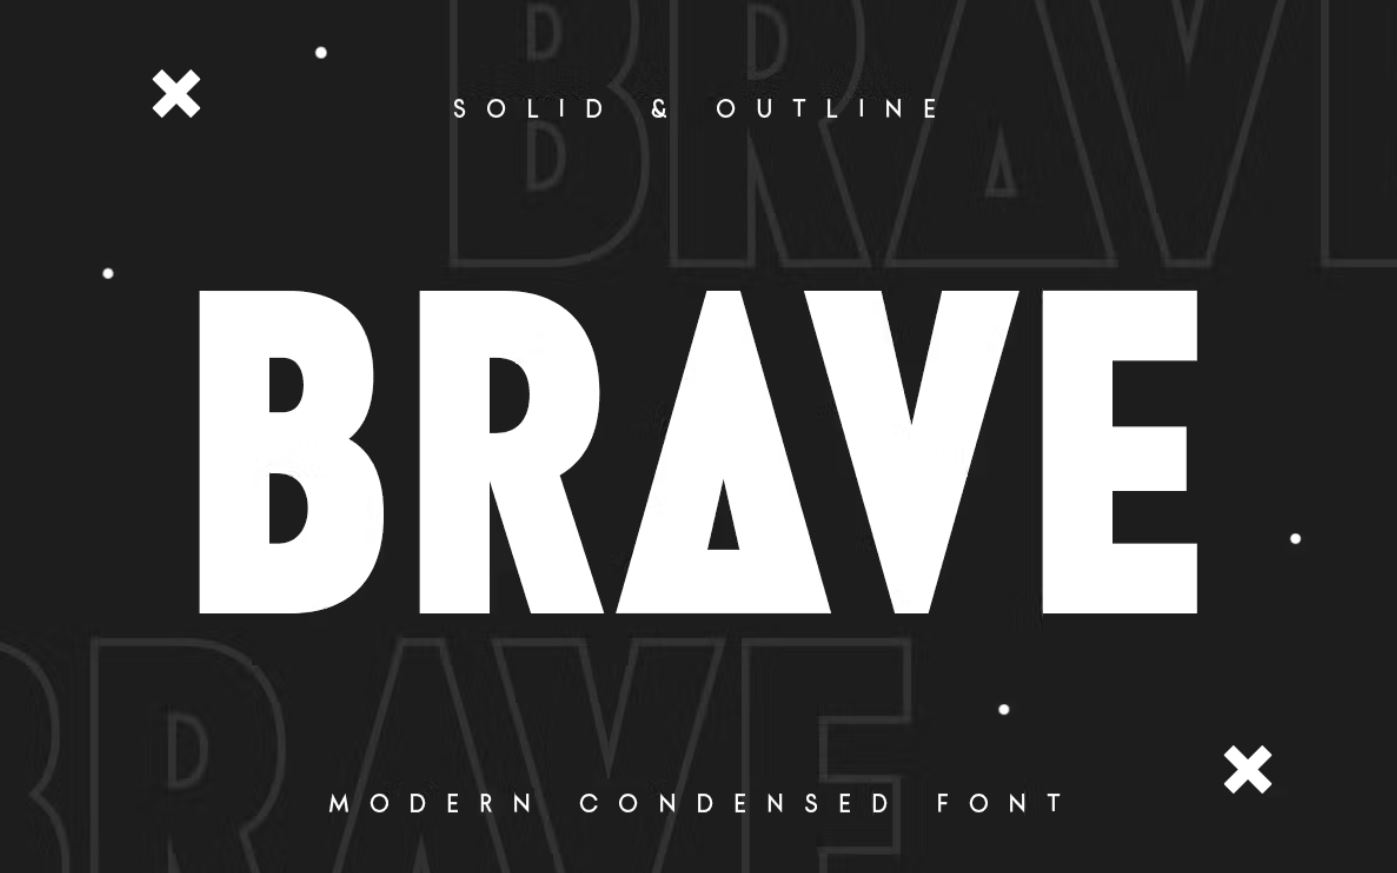 Solid and Outline Modern Style Script Fonts